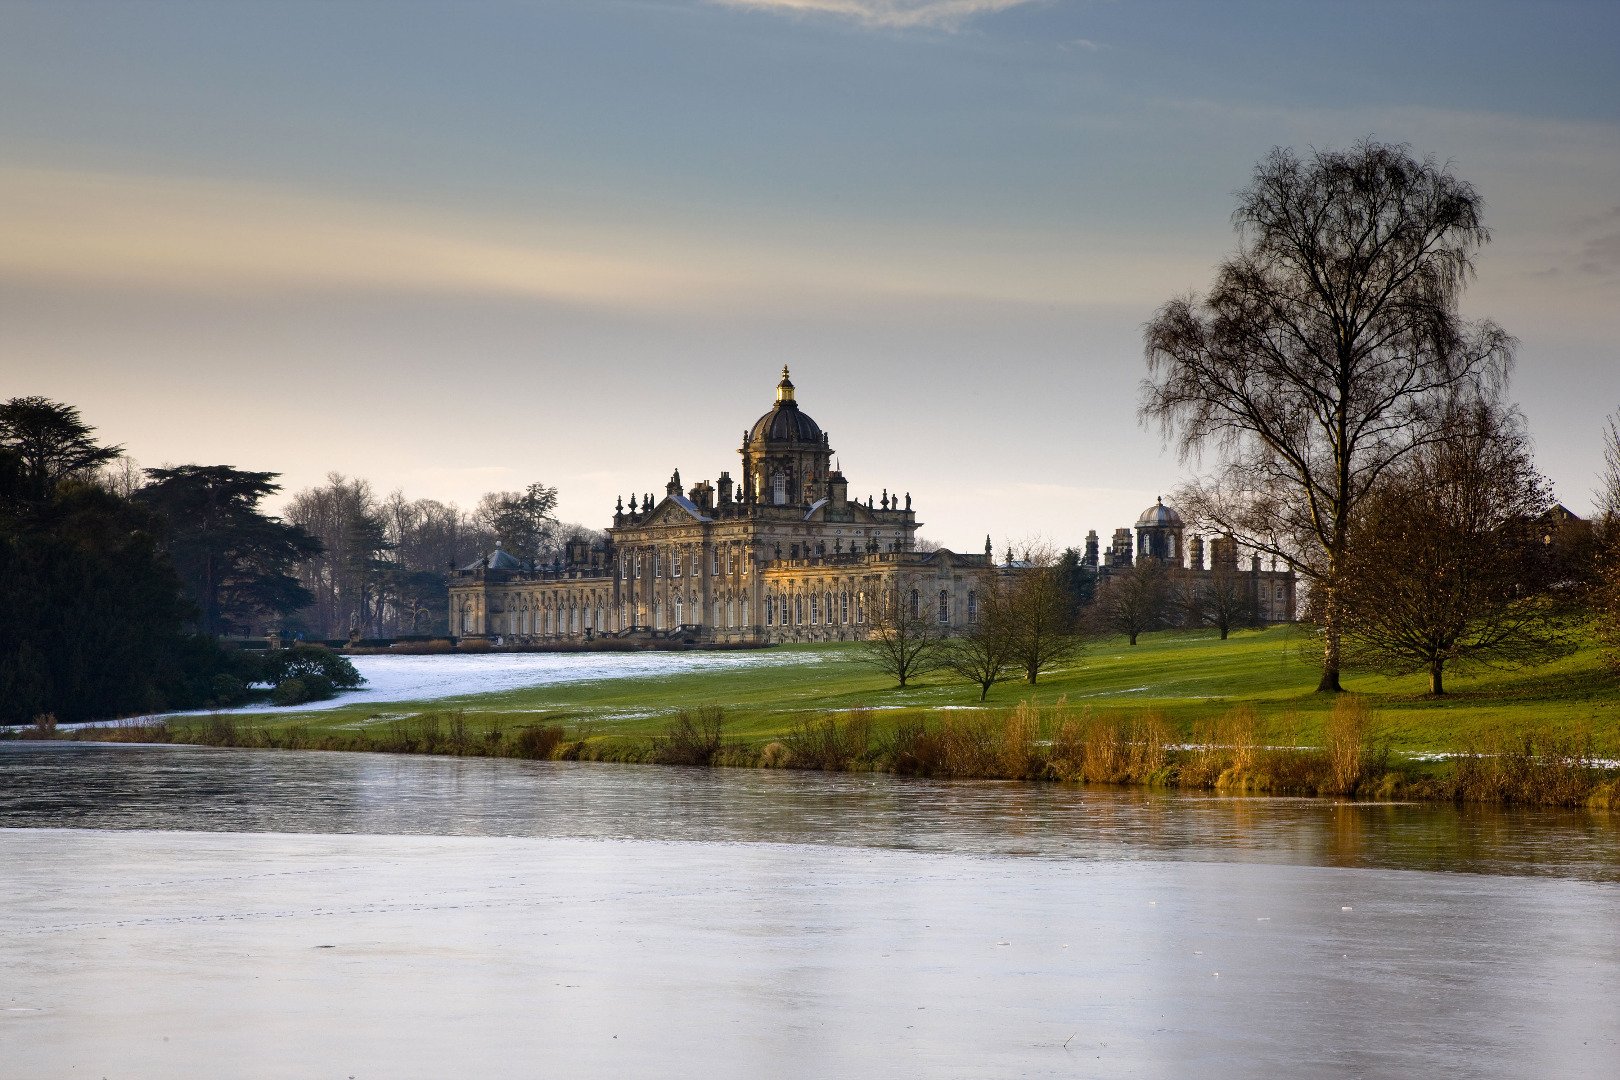 Image name castle howard and south lake mike kipling the 34 image from the post Yorkshire Stately Homes and Gardens in Yorkshire.com.